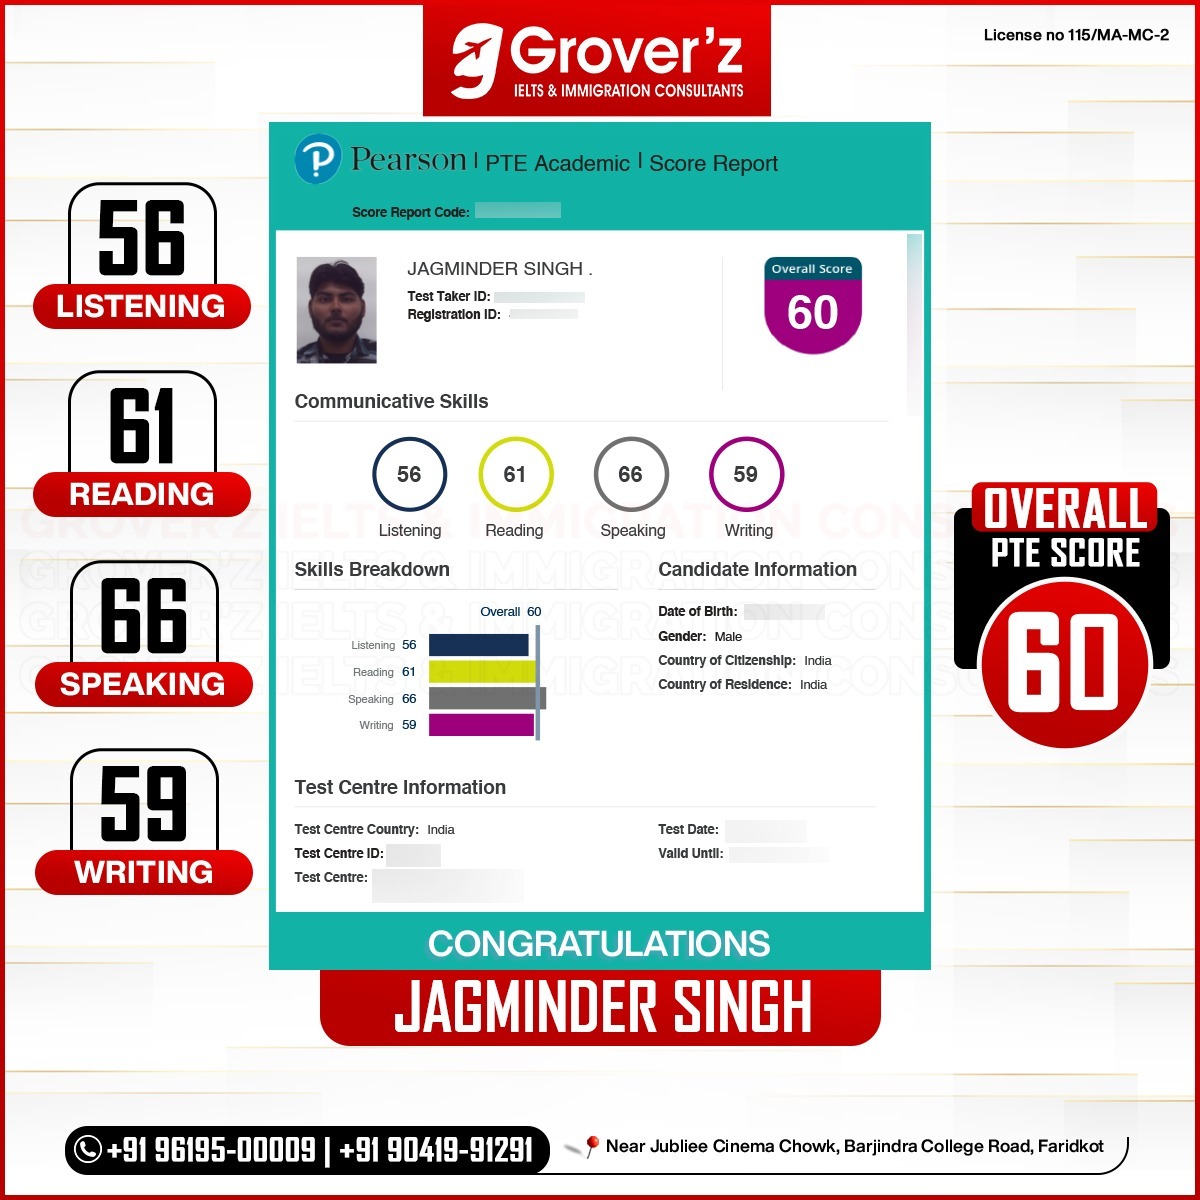 🎓 Our team is delighted to congratulate Jagminder on attaining a strong score of 60 in the Pearson Test of English. 📚🎊 #GroverzIeltsImmigration #PTE #PTEsuccess #LanguageMastery #GuidedLearning #AchievementUnlocked